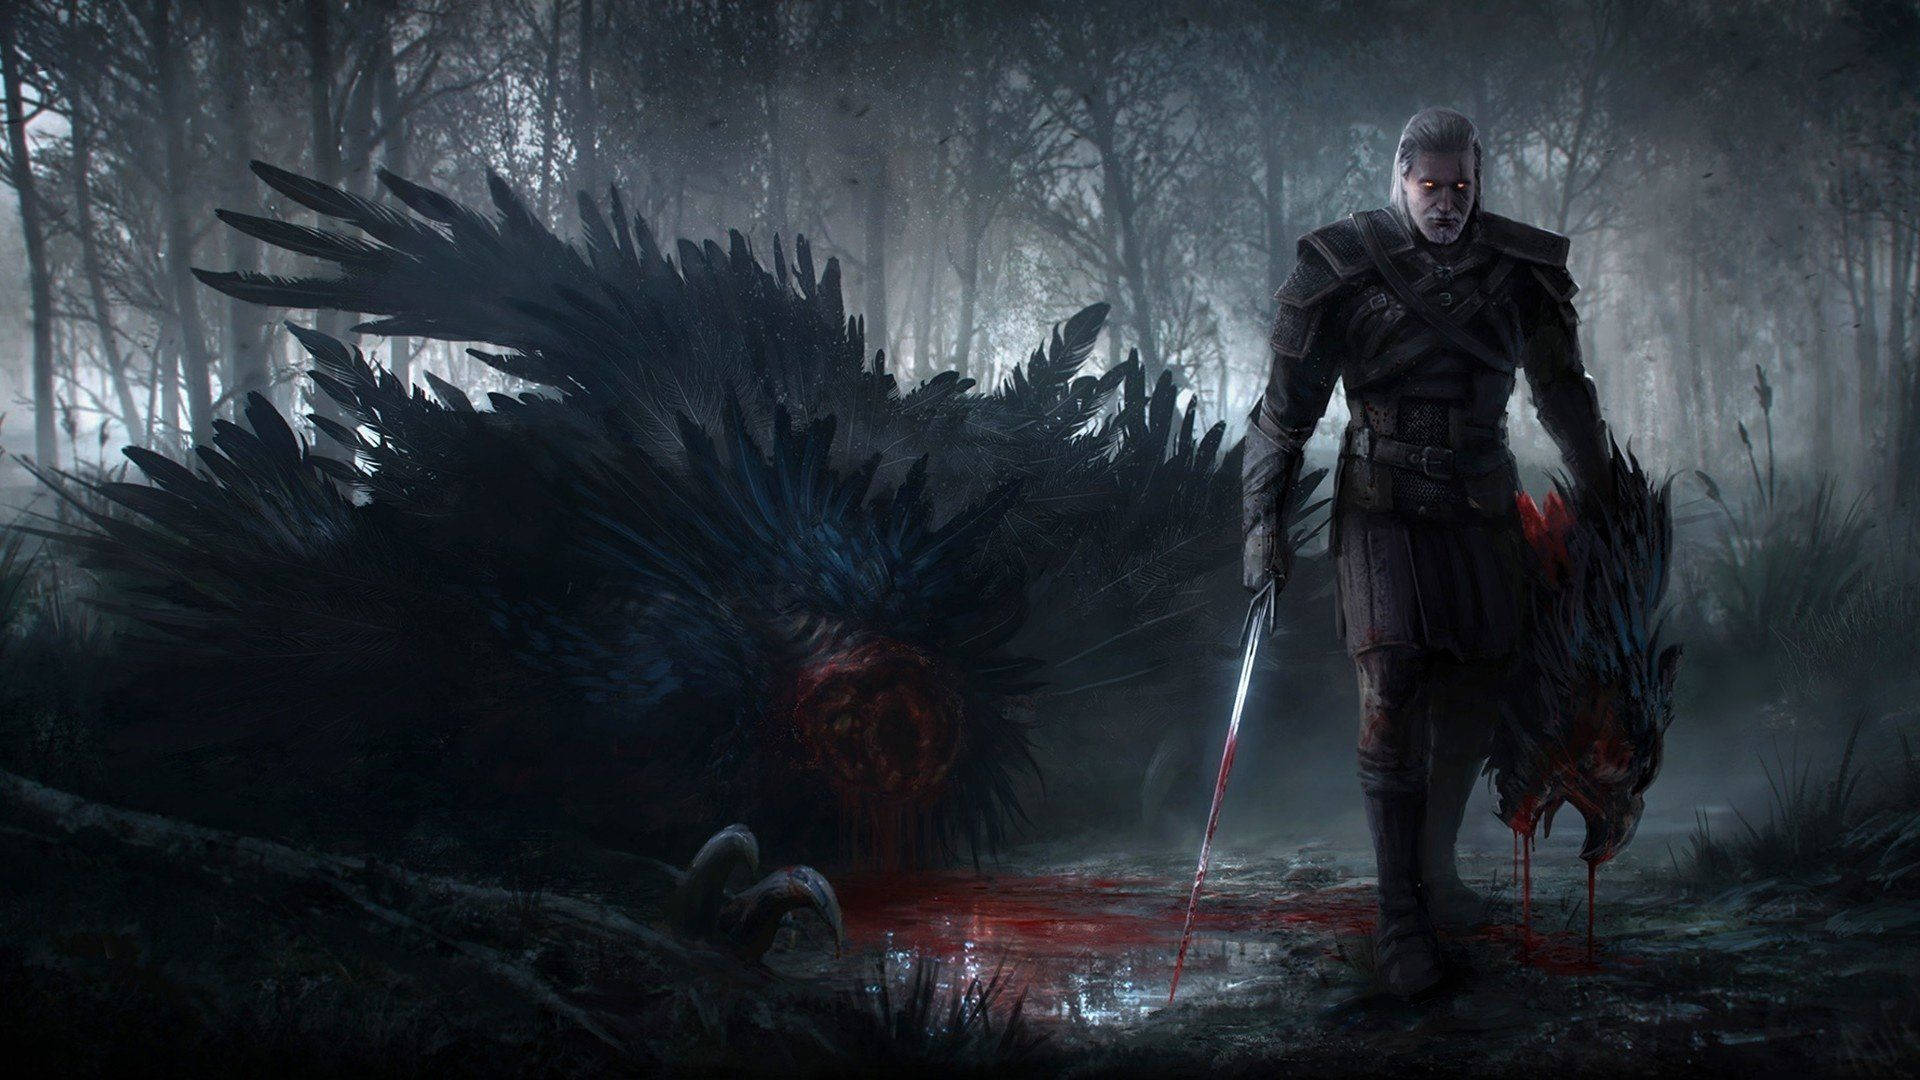 “Geralt of Rivia dispatching a demon with his magic and skill.” Wallpaper